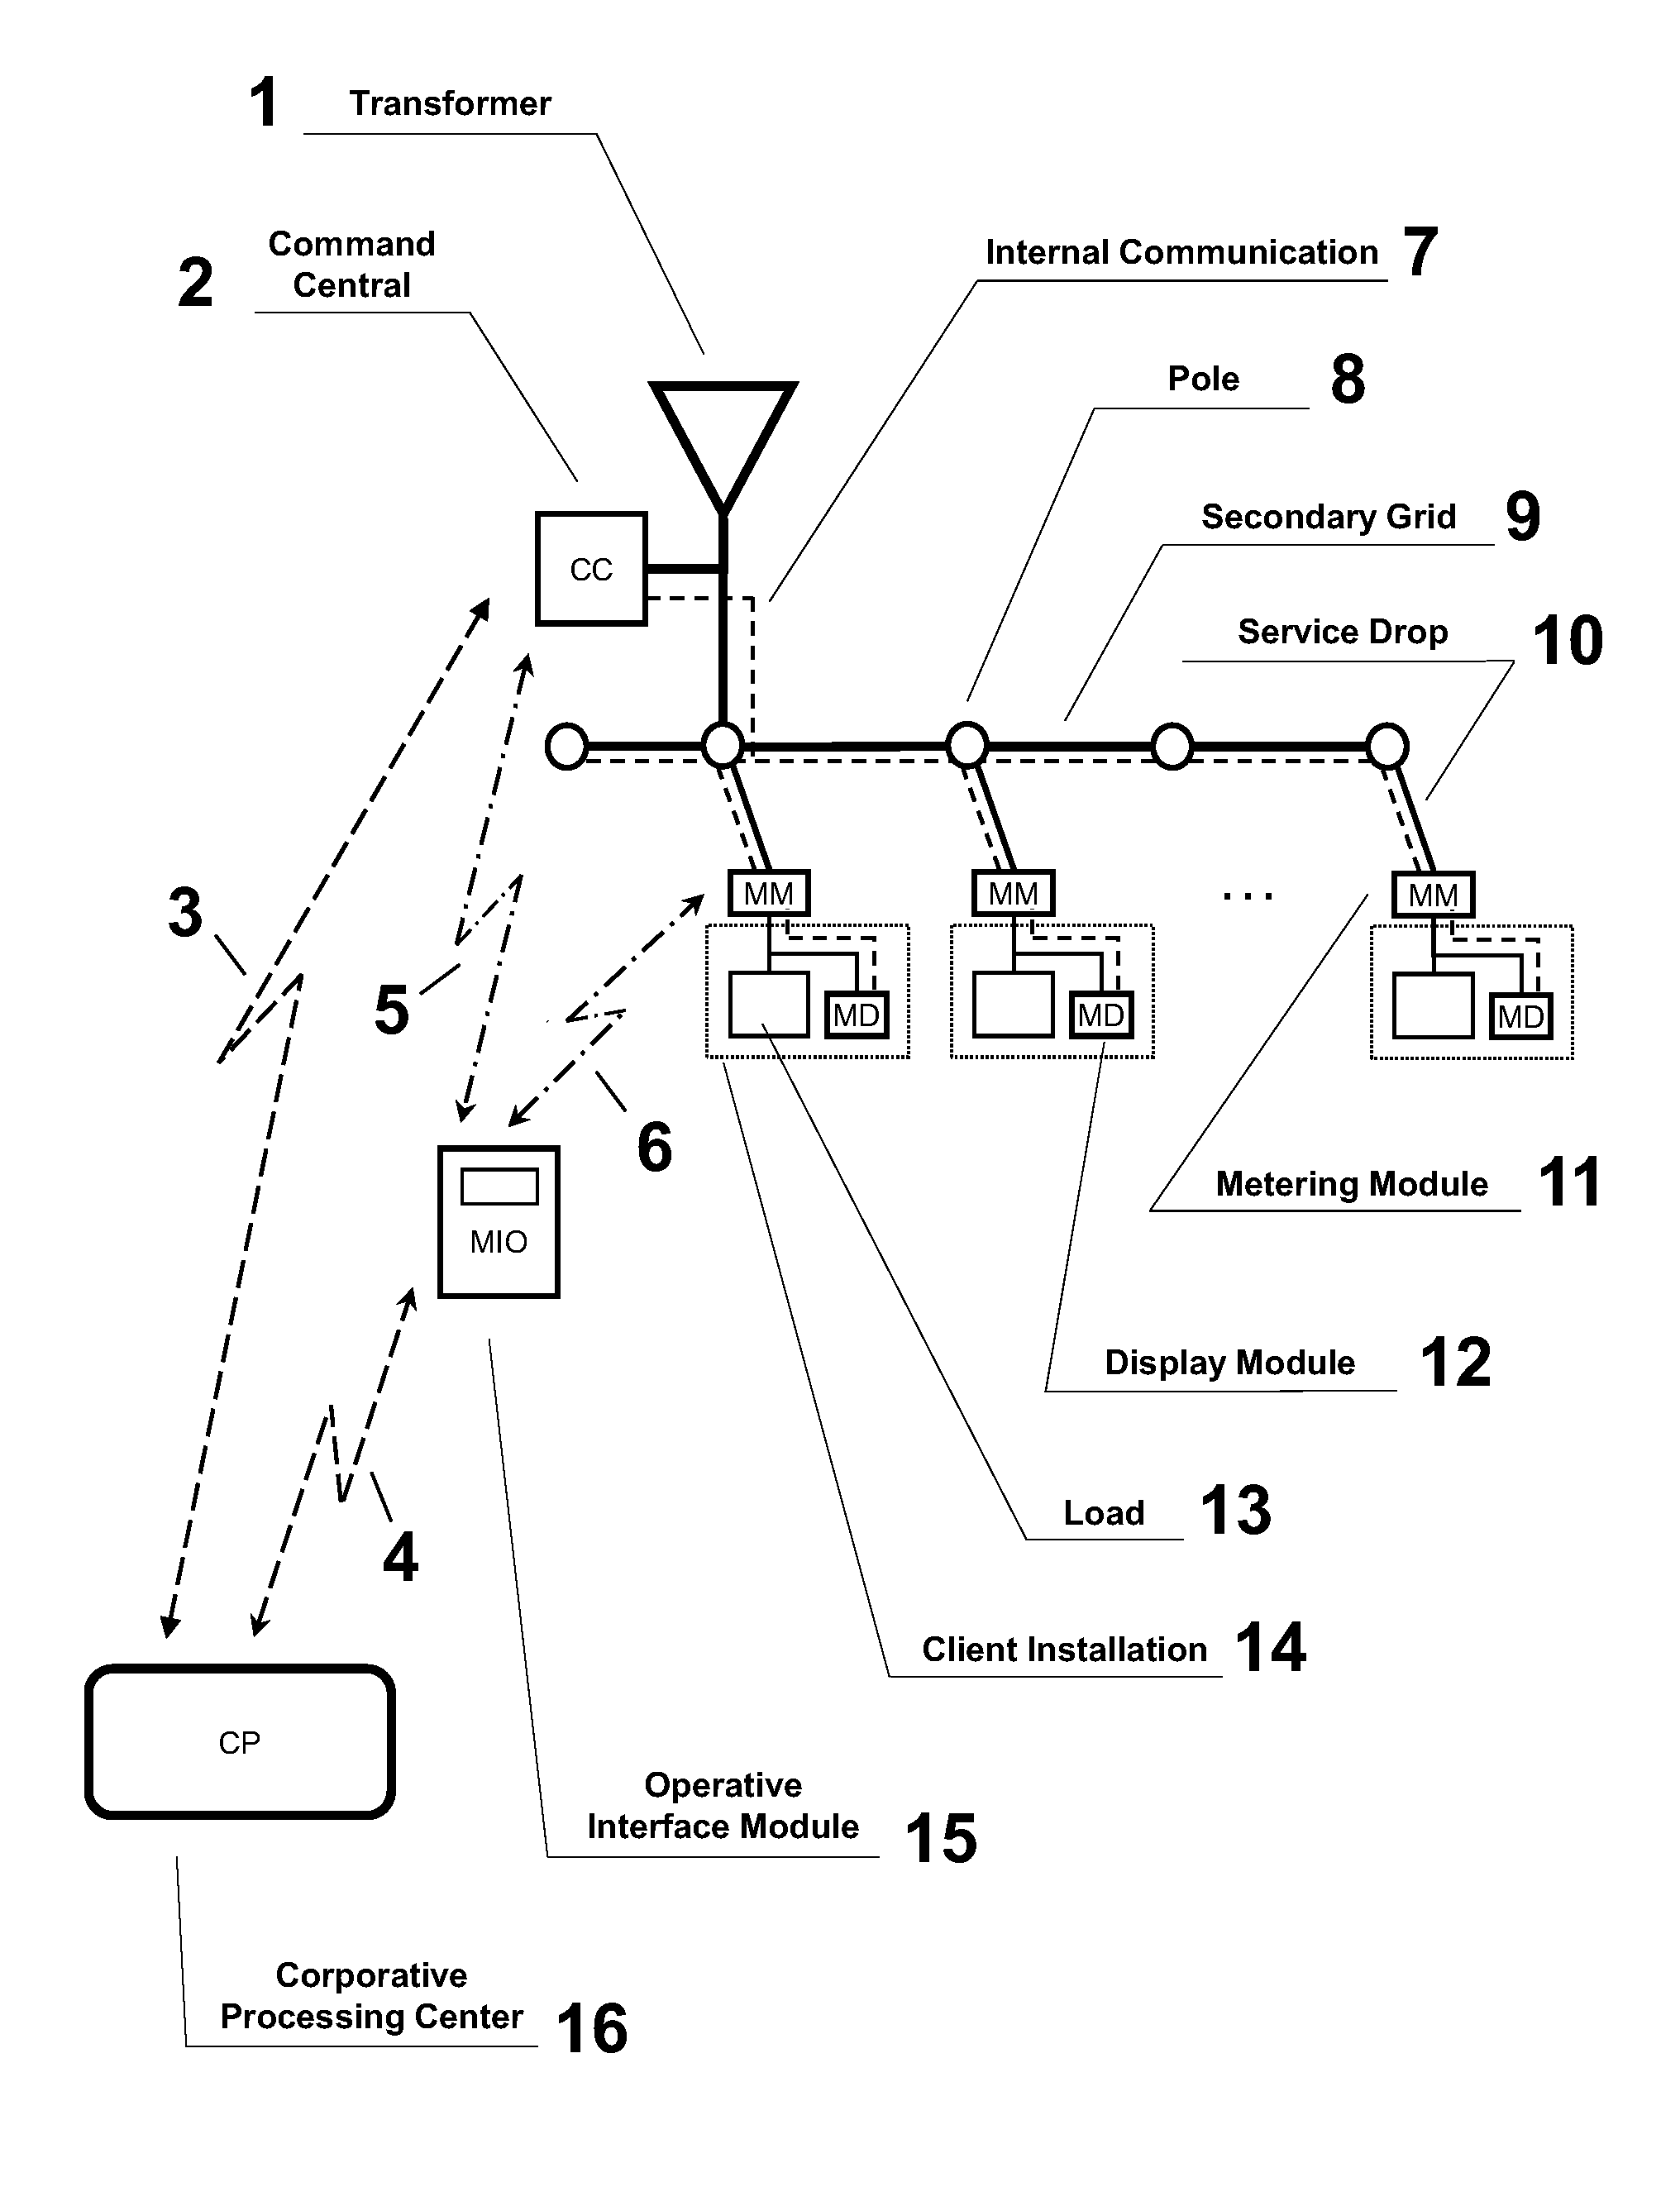 System for controlling, measuring and monitoring the secondary electric power distribution grid